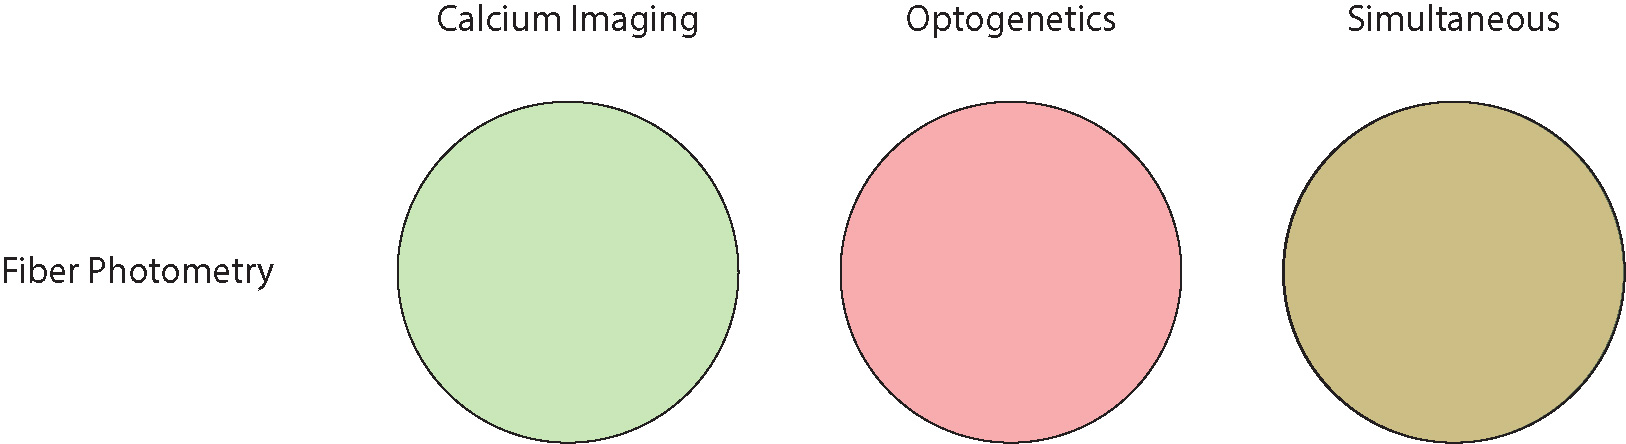 imaging and optogenetics resolution for fiber photometry